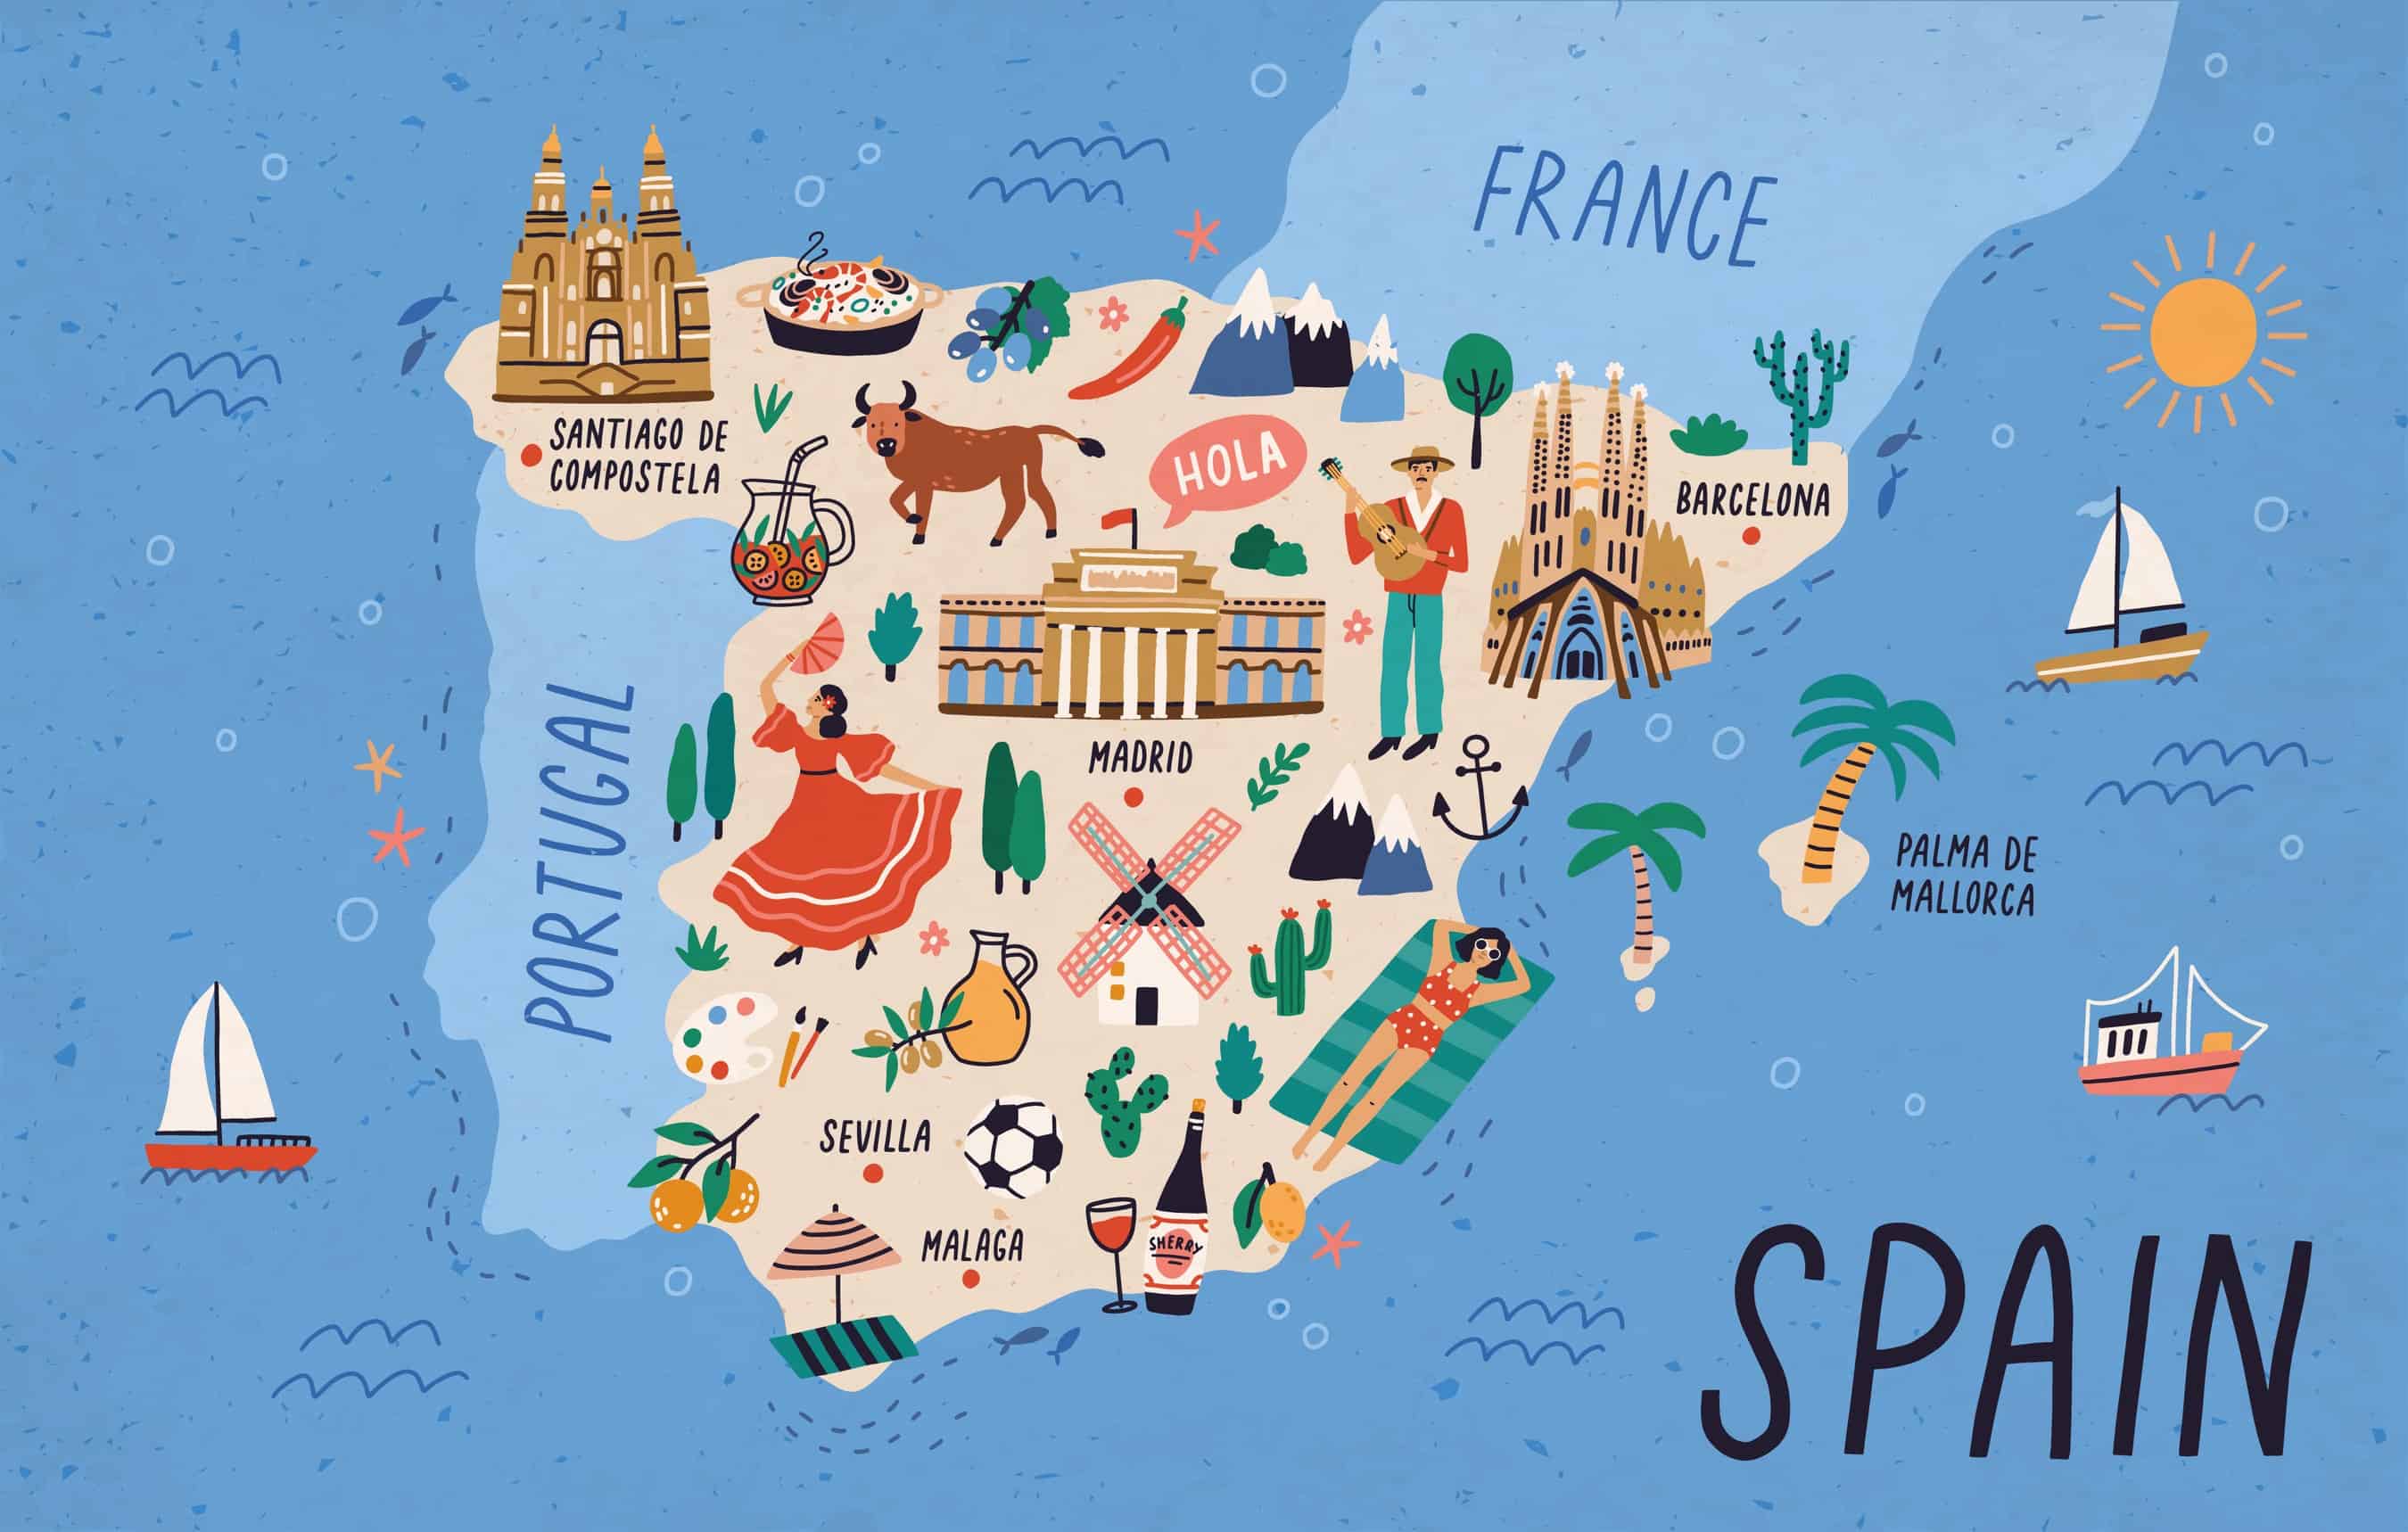 Map of Spain with touristic landmarks, sights, and national symbols like flamenco dancer, cathedrals, paella, sangria, bull, man playing guitar